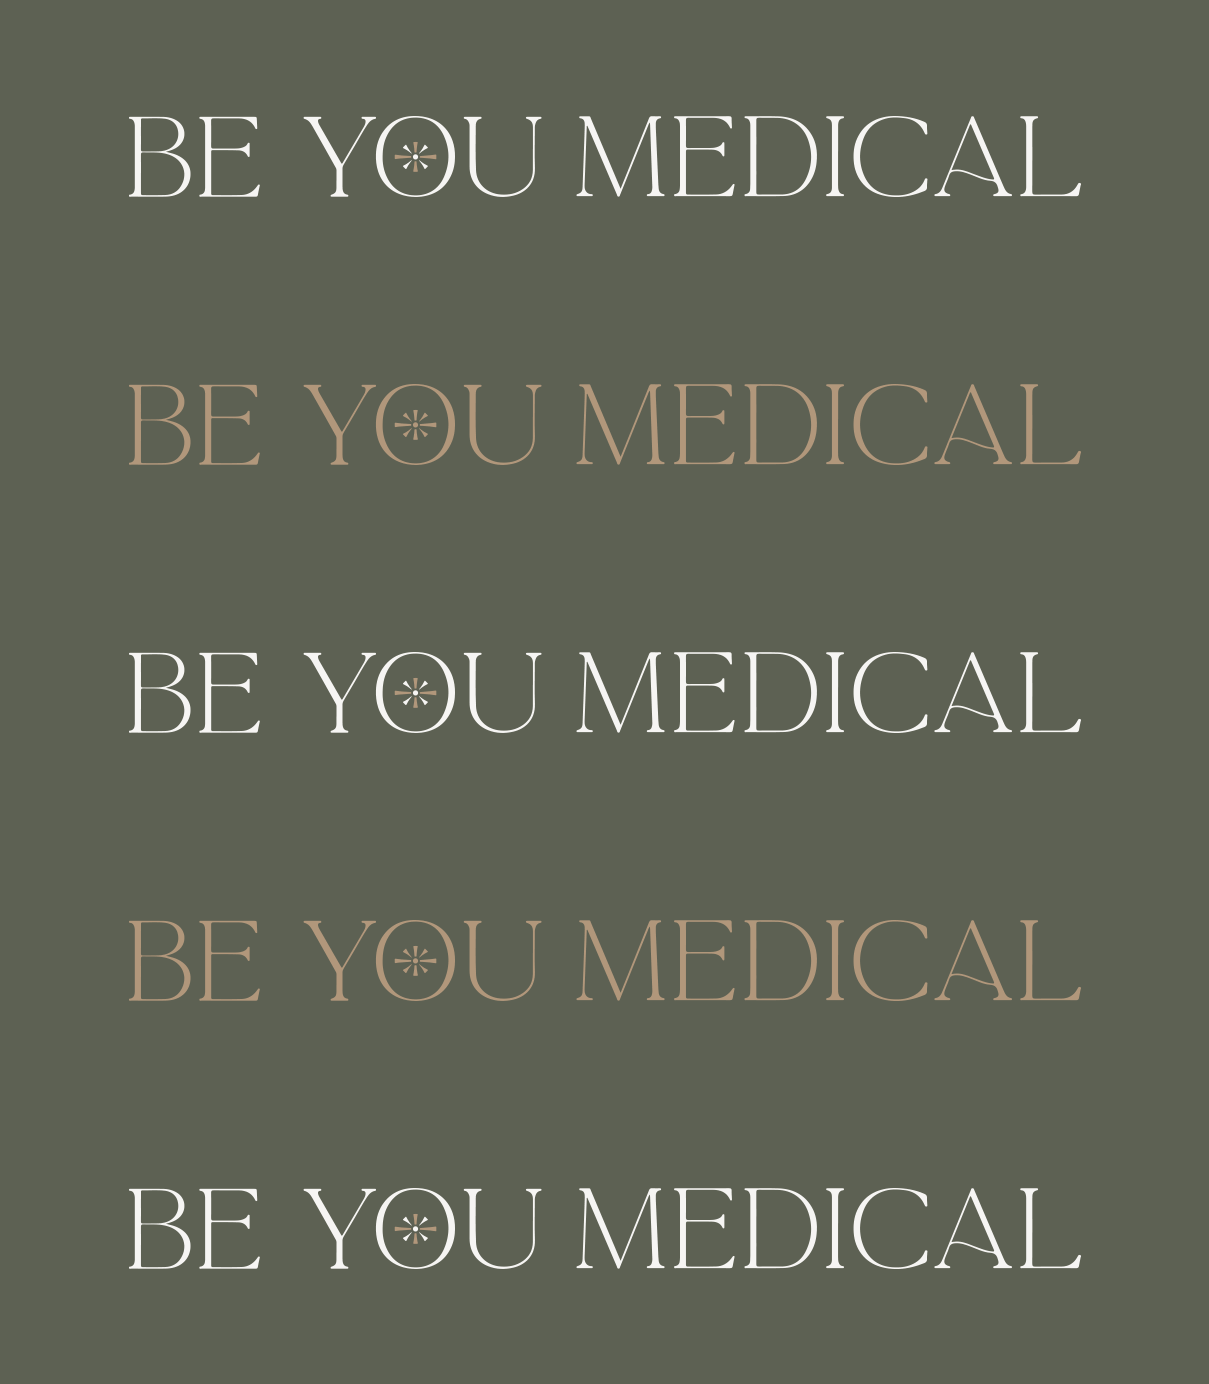 Be You Medical horizontal logo repeated 5 times alternative off white and tan